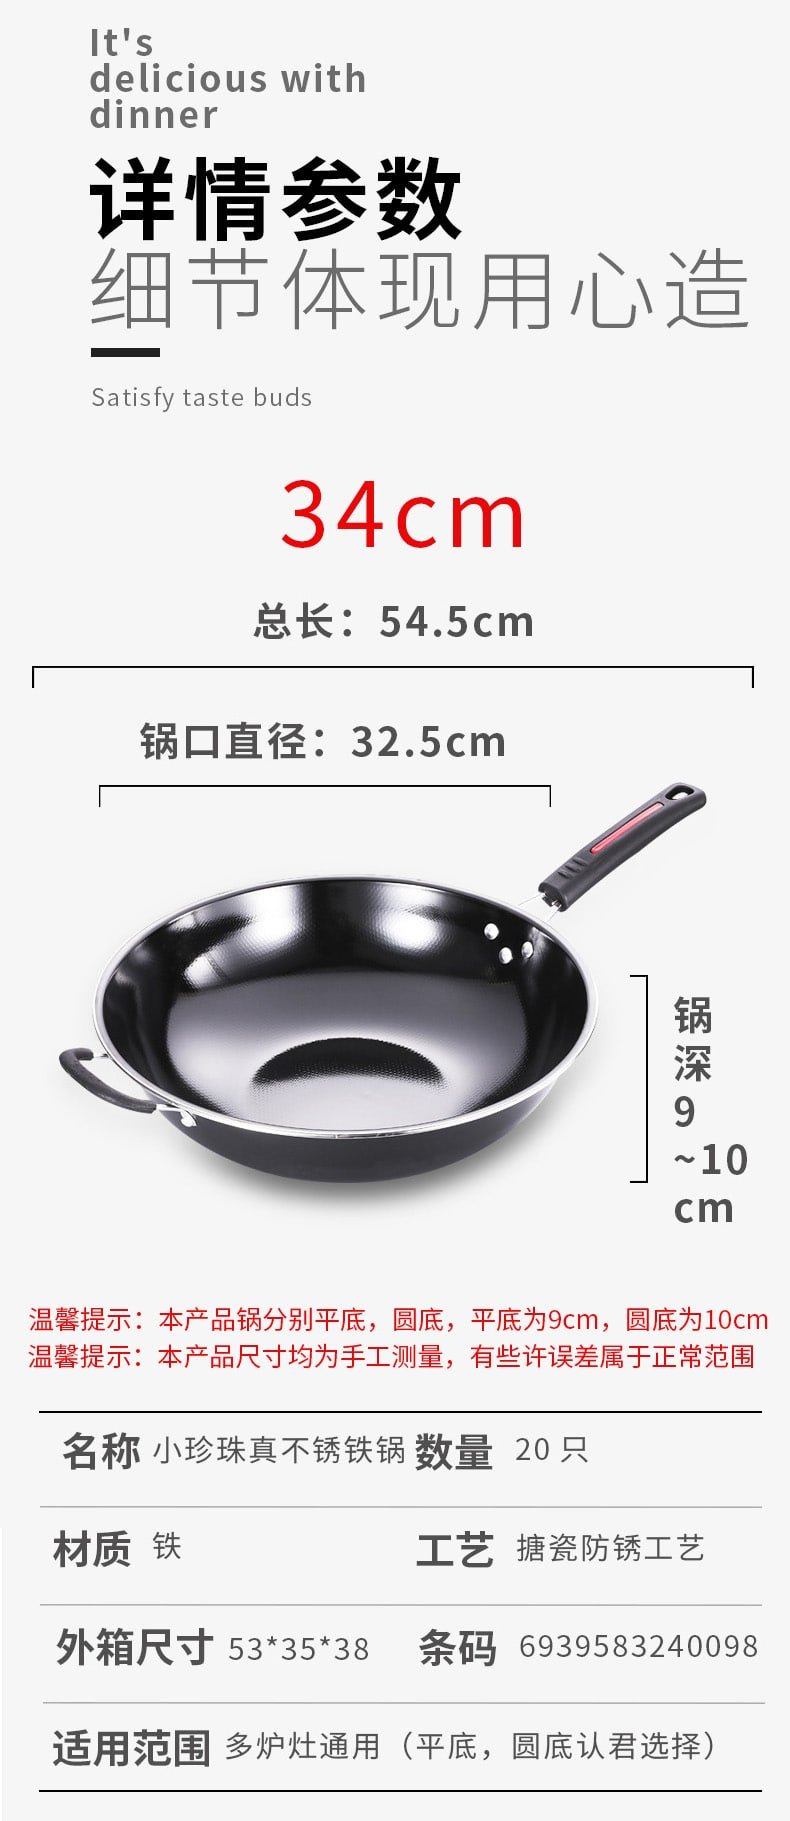 Easy Wash Stainless Wok - Size